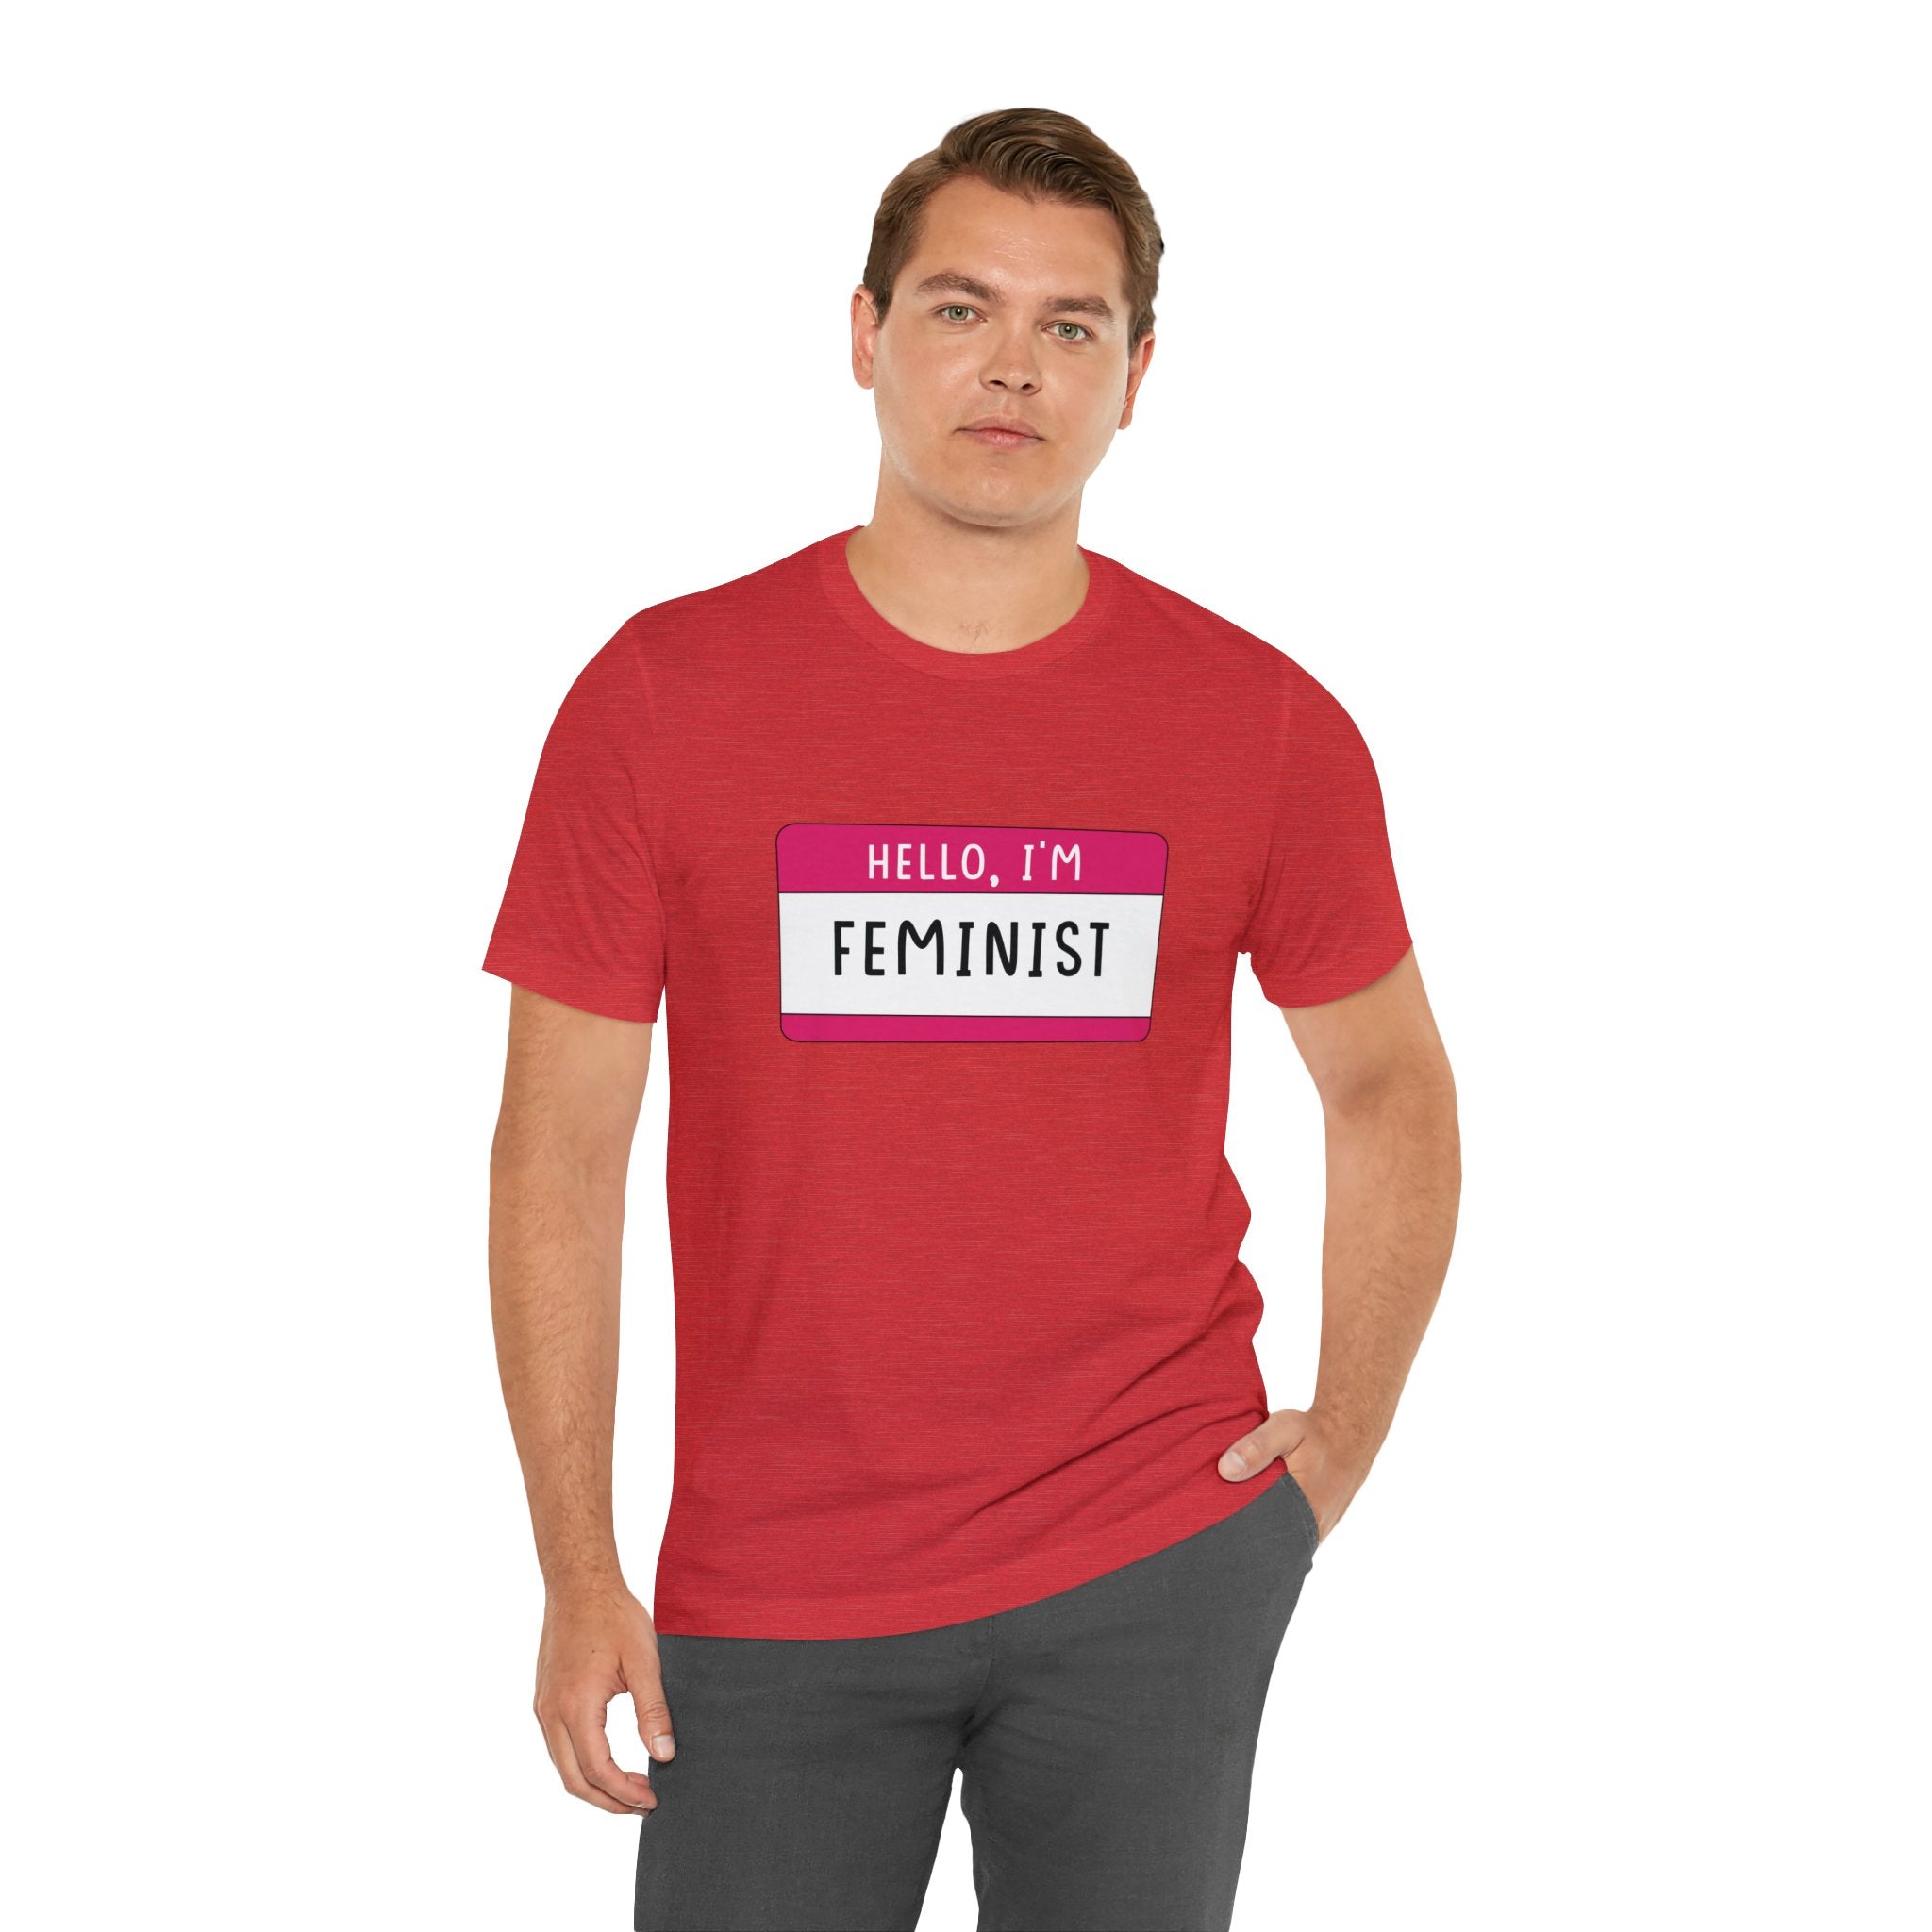 Man in a red "Hello, I'm Feminist T-Shirt" with an "equality" name tag, standing with one hand lightly resting on his hip, against a white background.